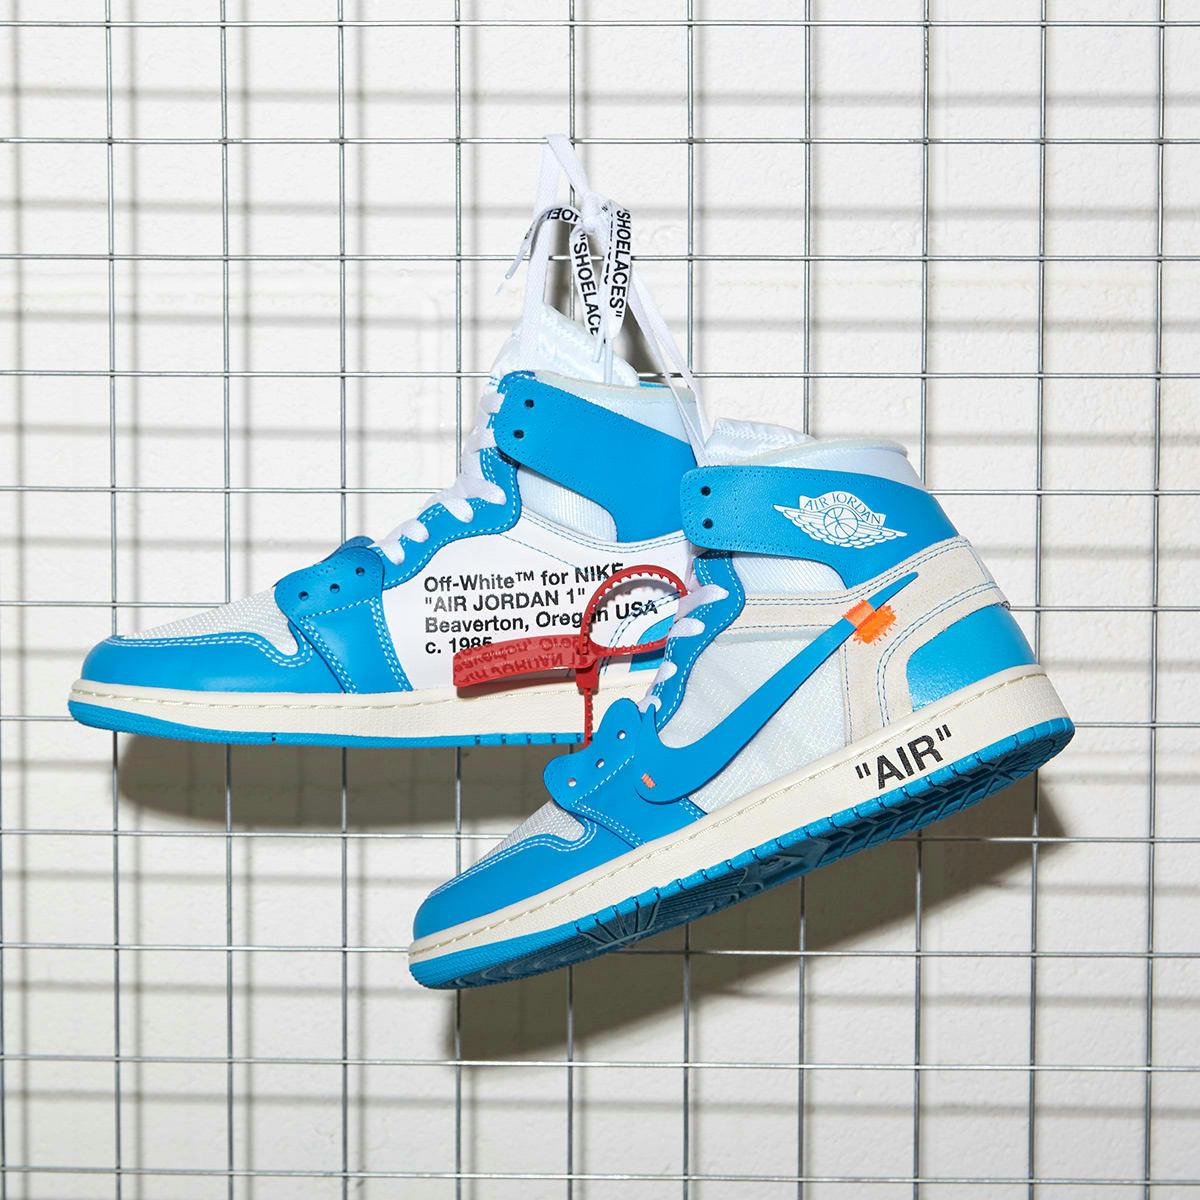 Off-White x Air Jordan 1 Energy 'UNC' - Register now on END. Launches ...